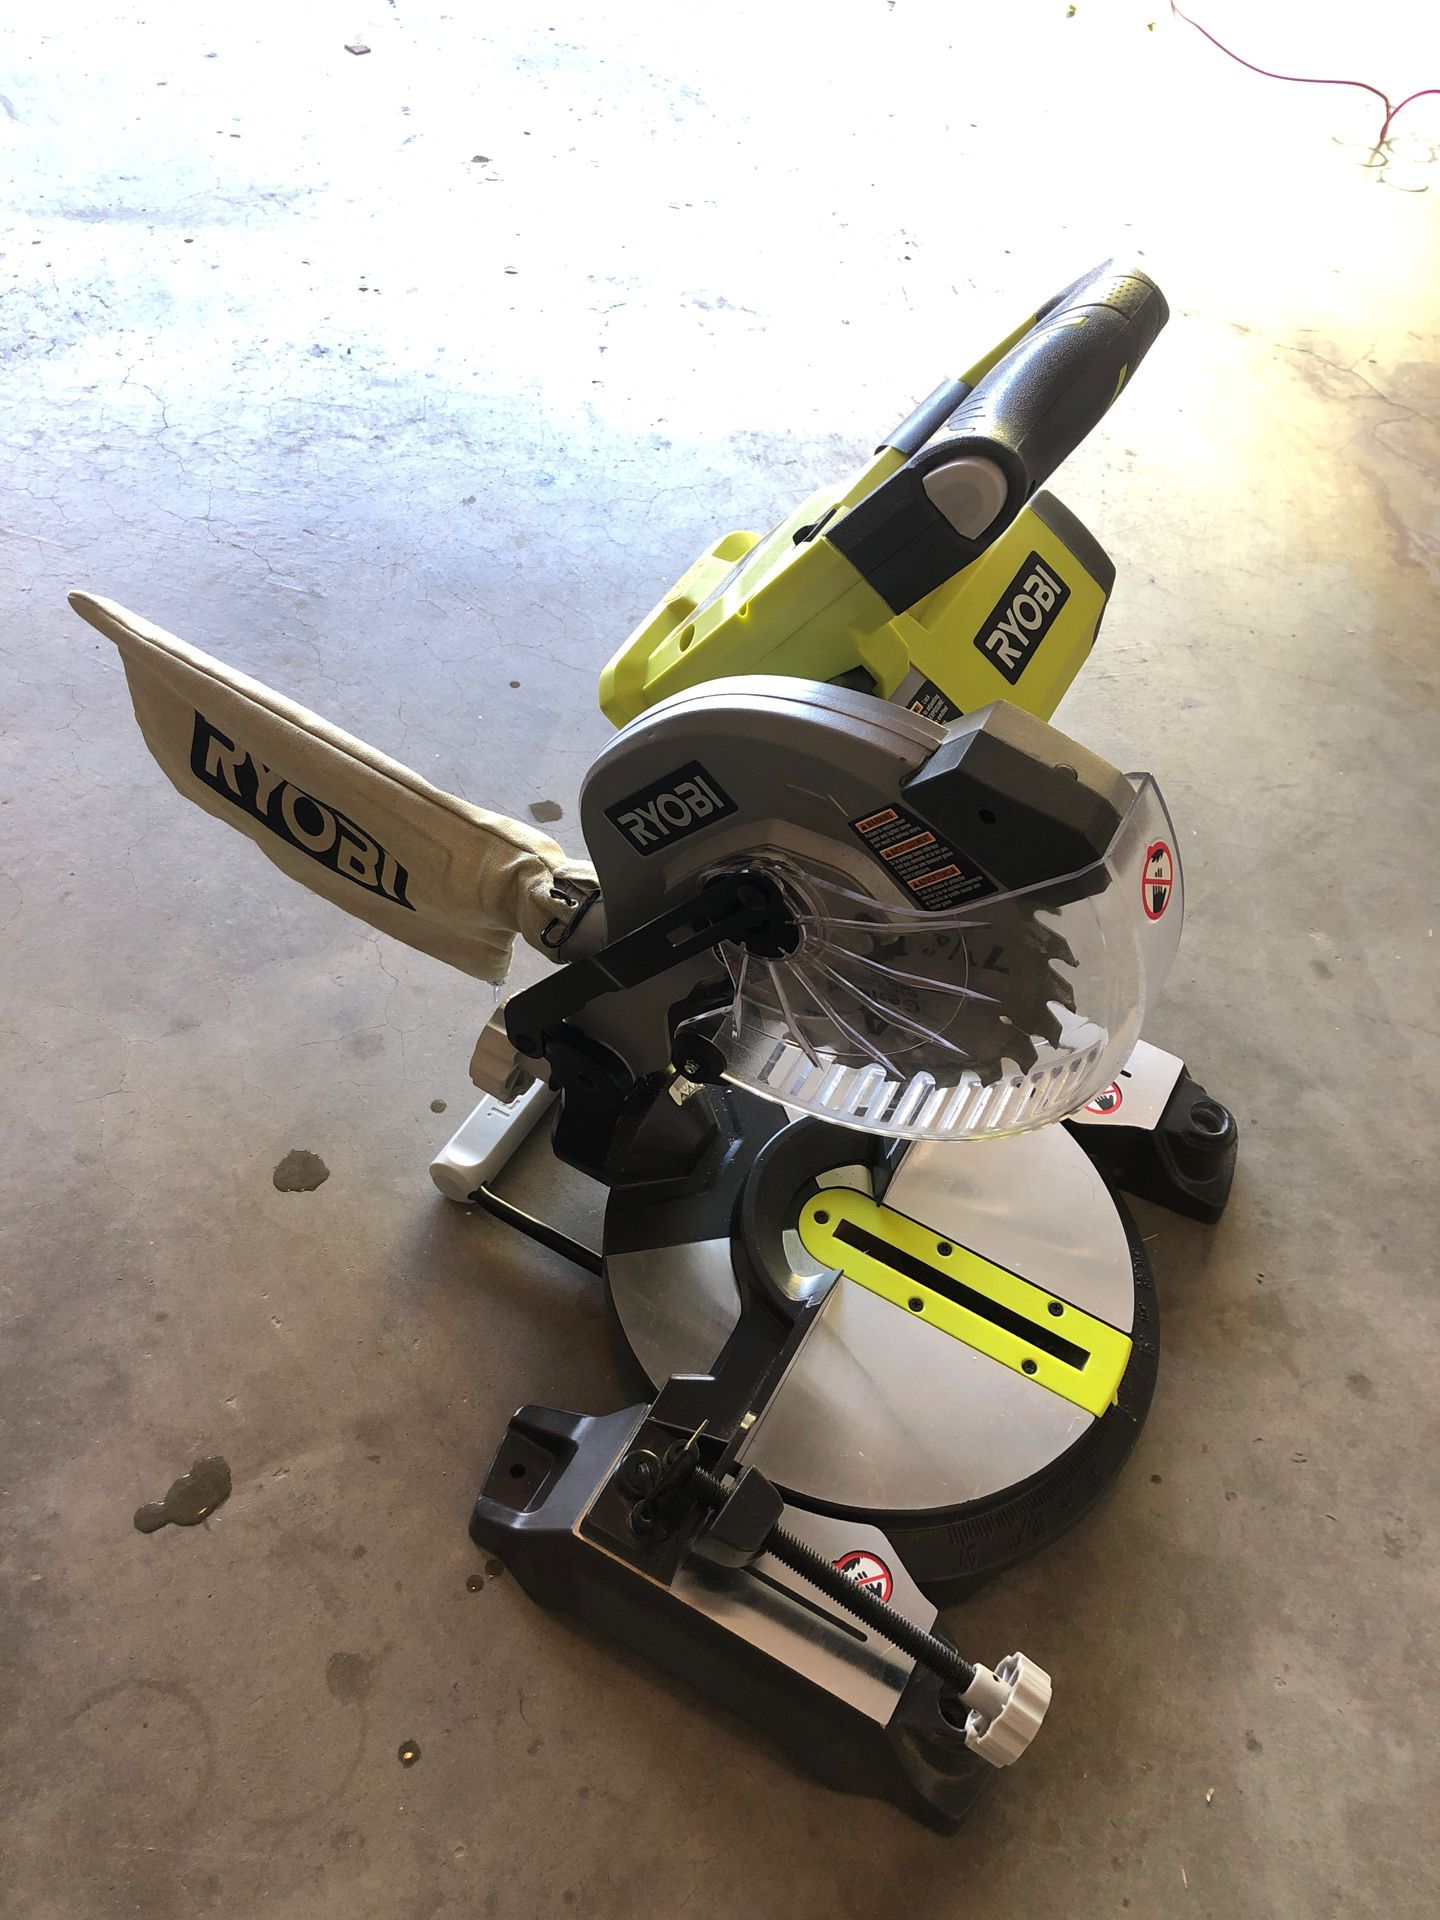 RYOBI 18-Volt ONE+ Cordless 7-1/4 in. Compound Miter Saw (Tool Only) with Blade and Blade Wrench